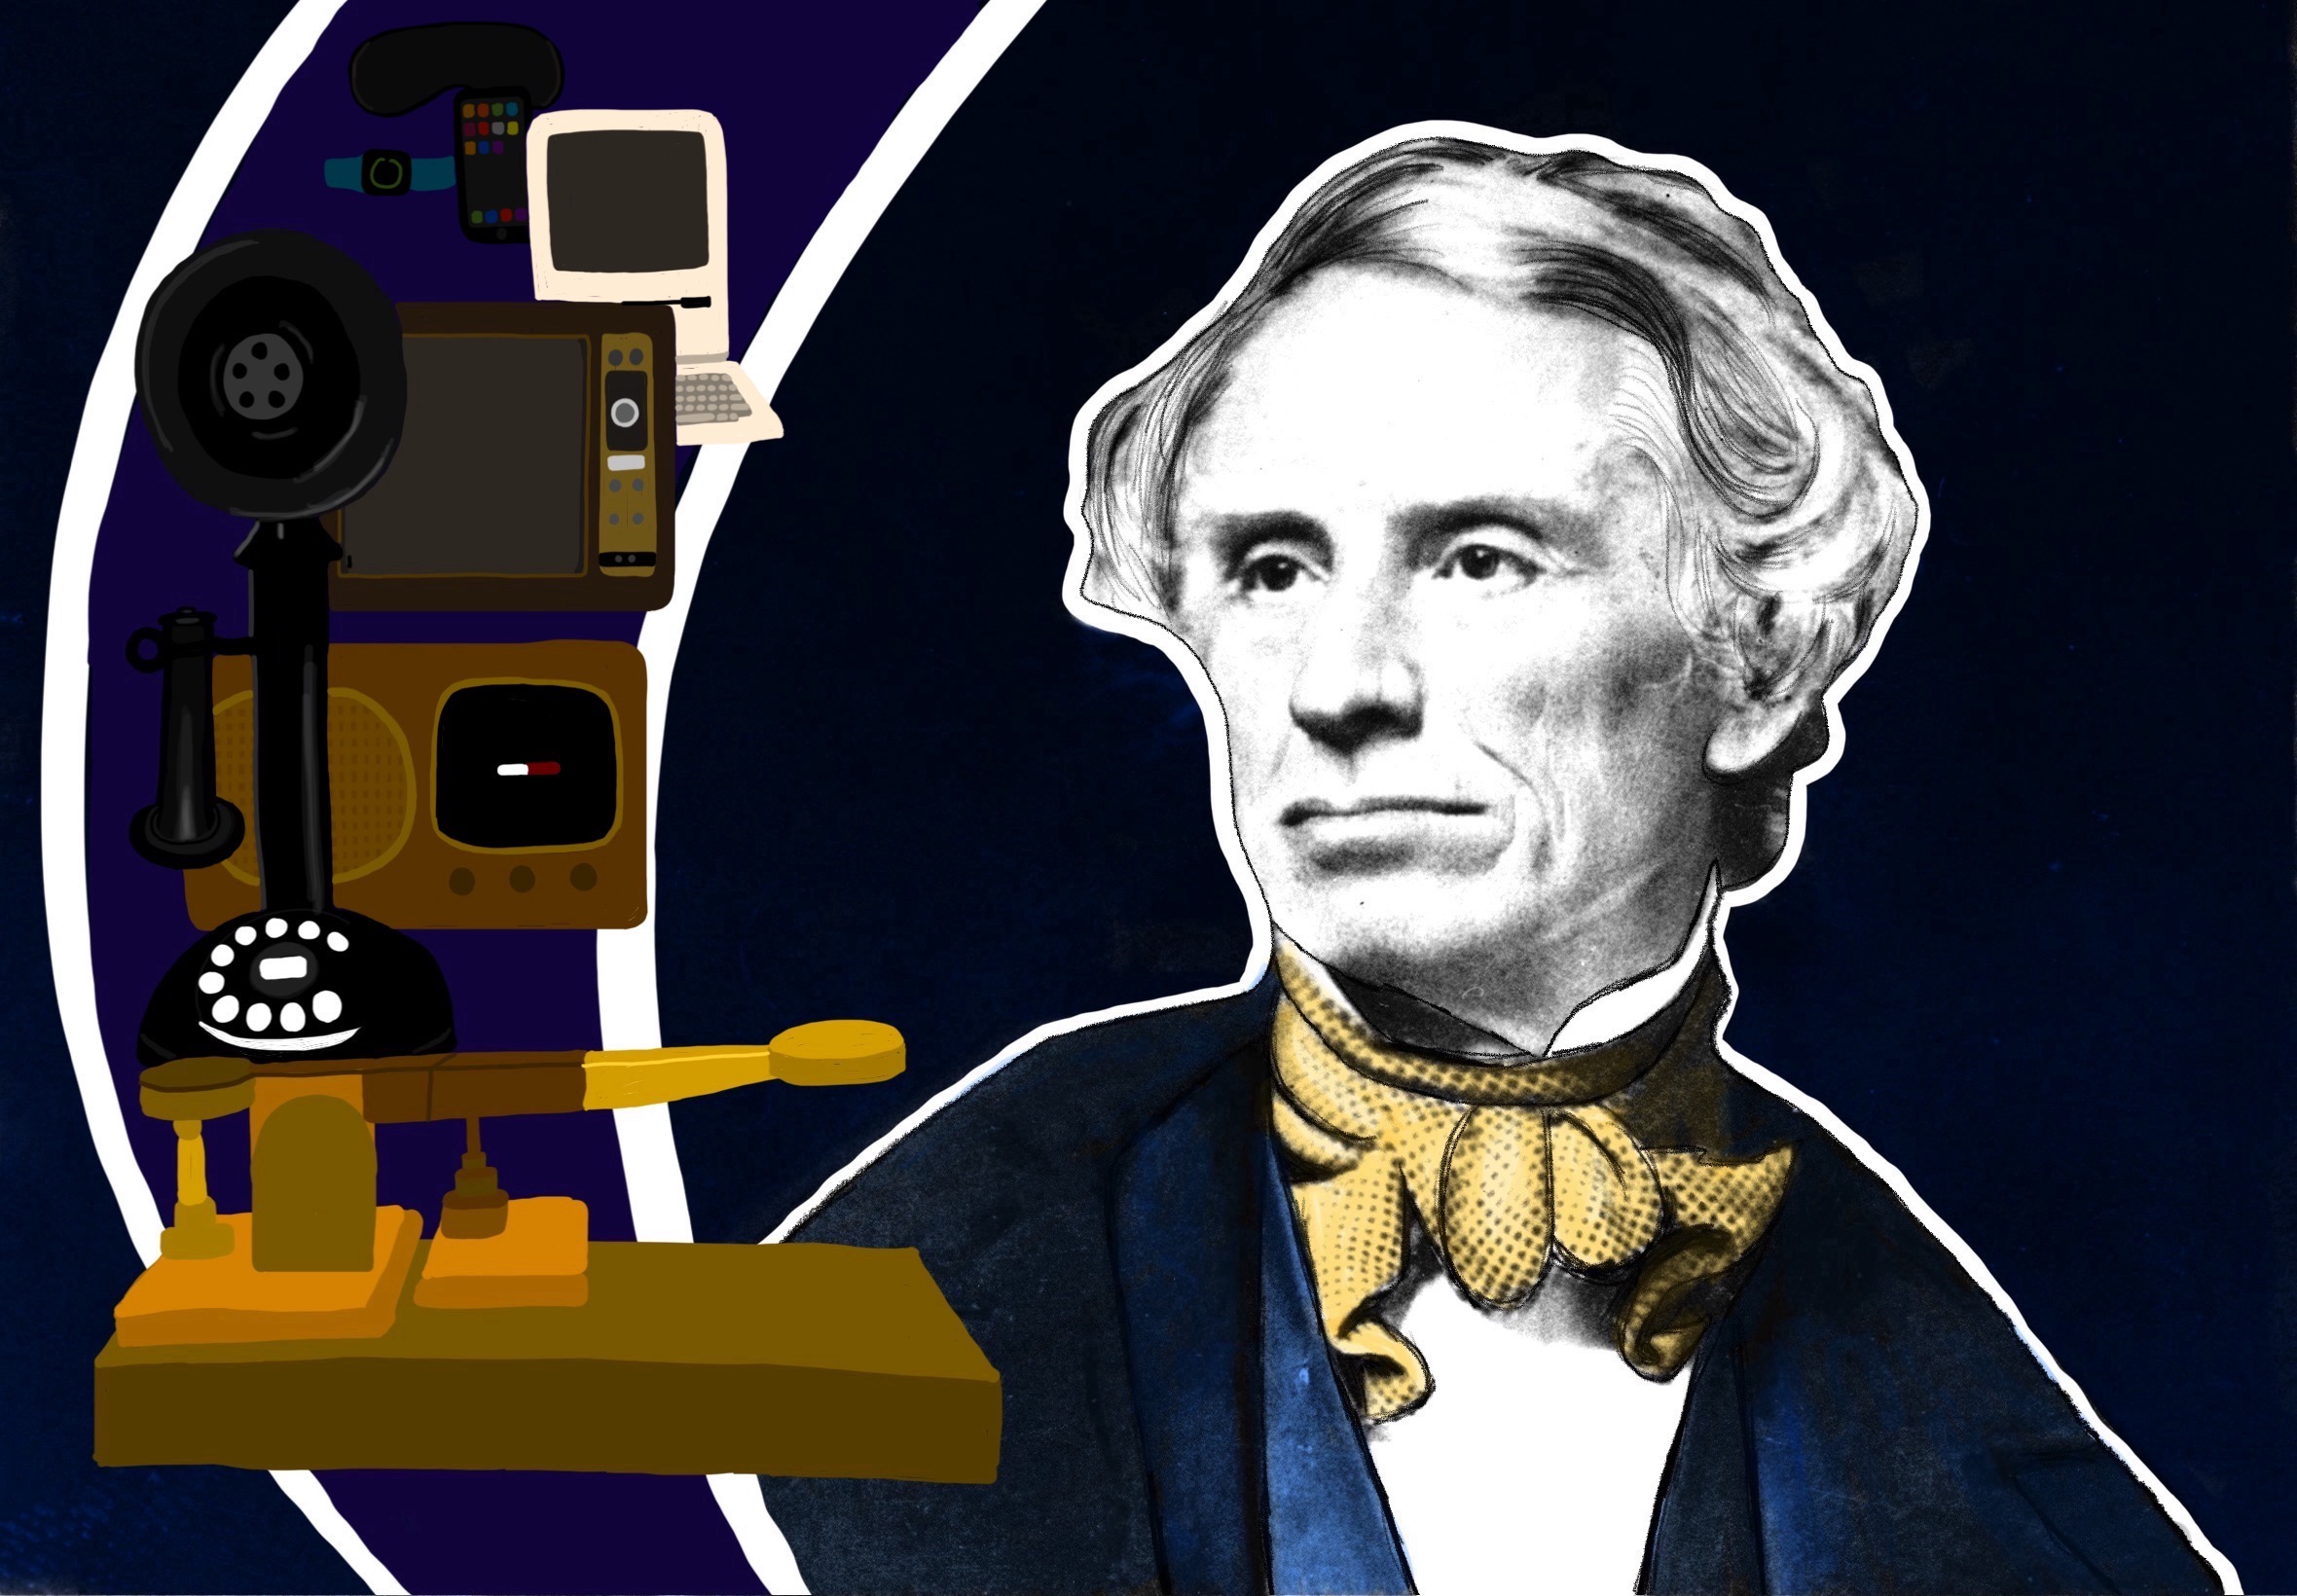 Image shows Samuel Morse with his invention, the telegraph, along with a phone, radio, television, computer, and more. 